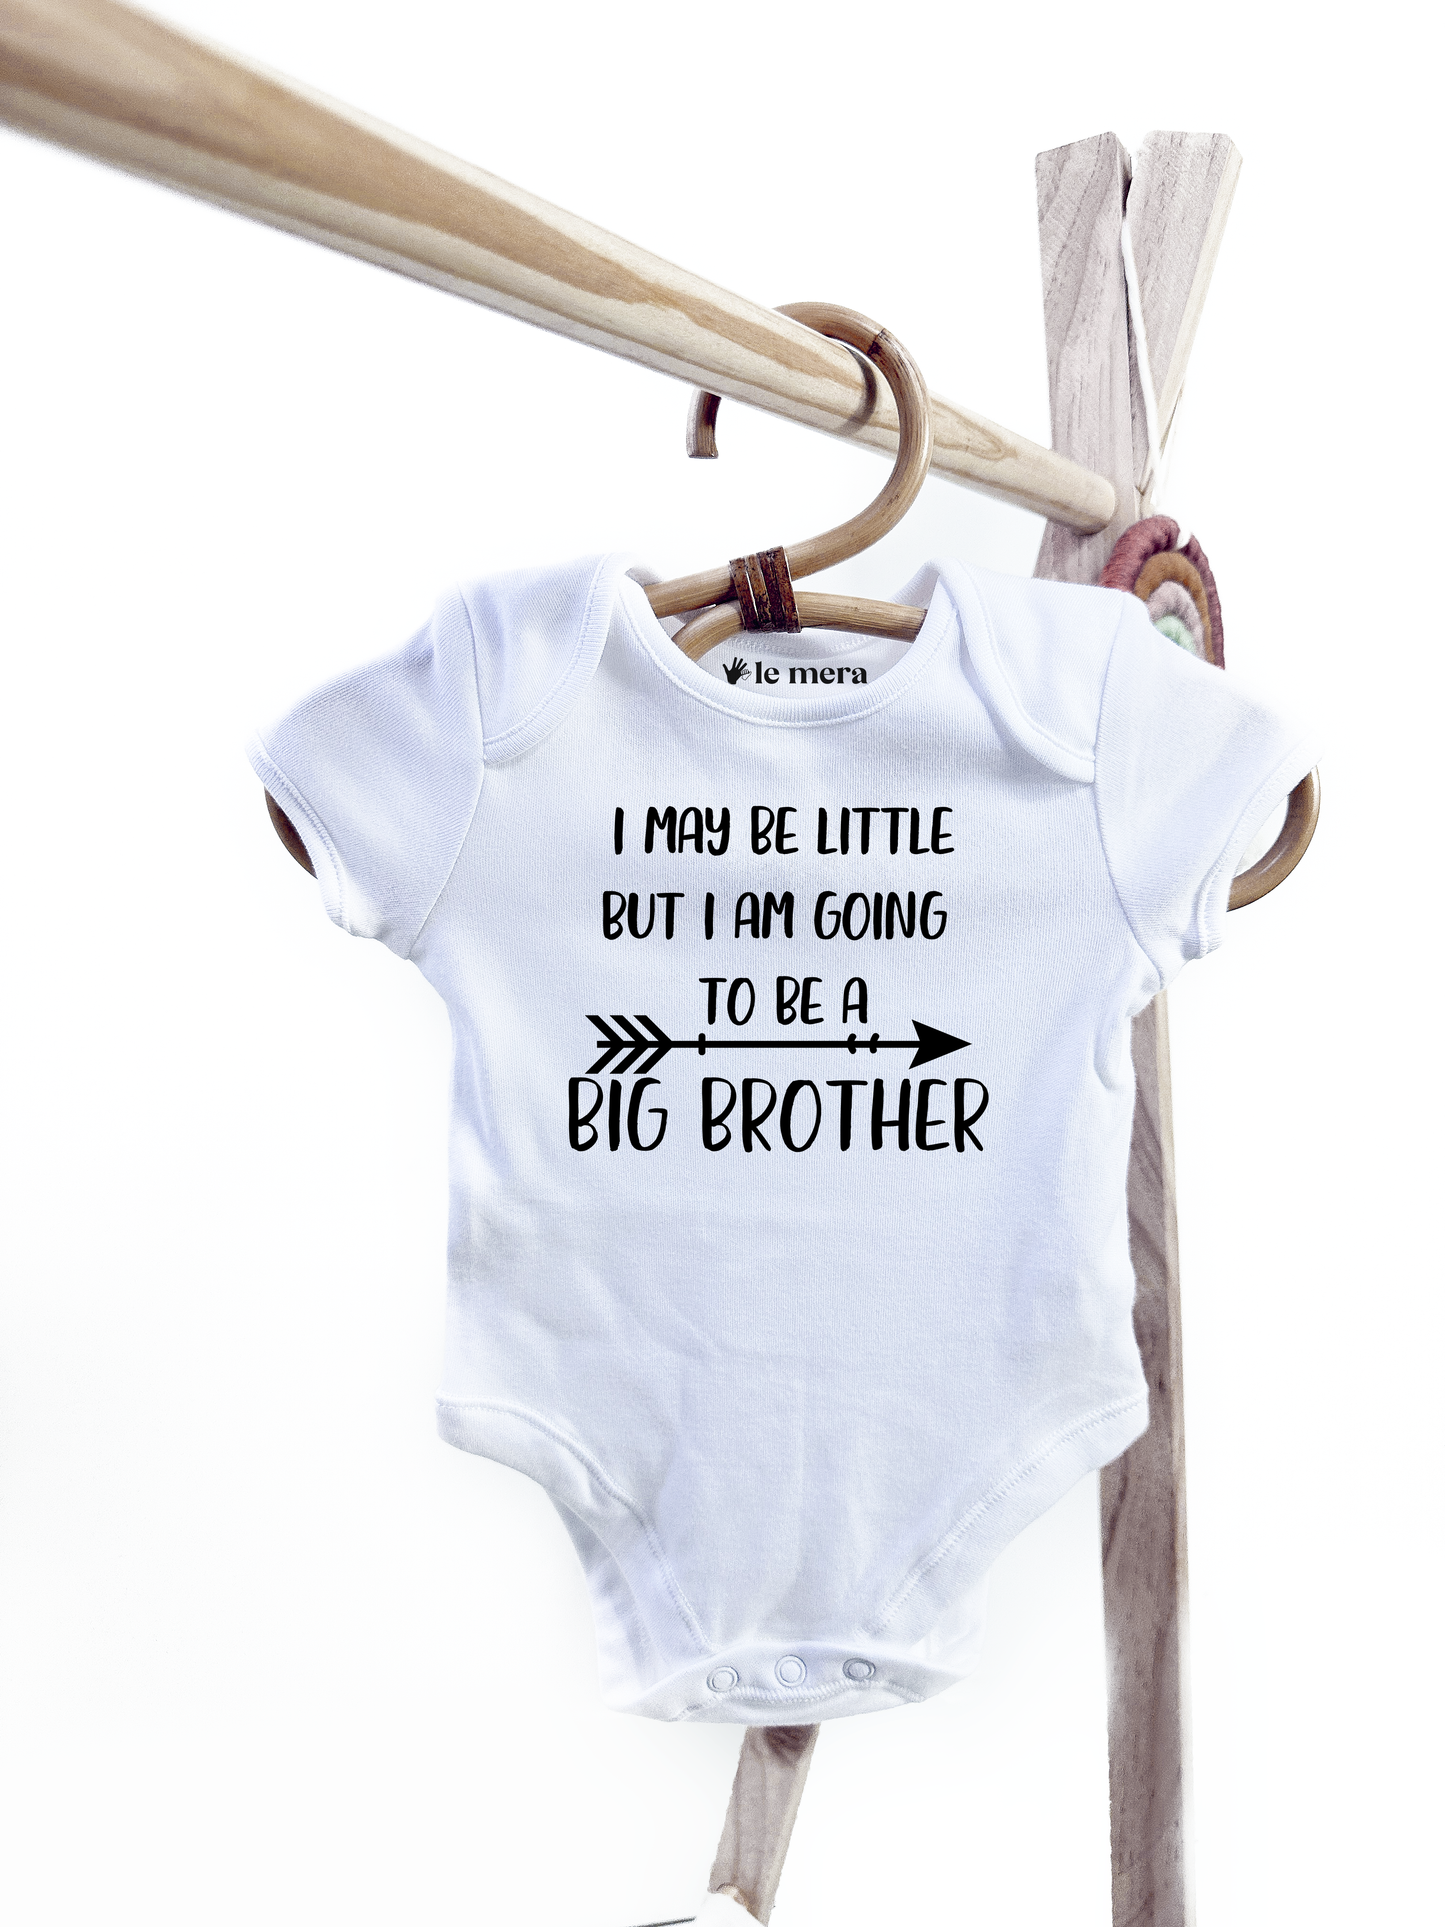 I May Be Little But I'm Going To Be A Big Brother Baby Vest, Baby Grow